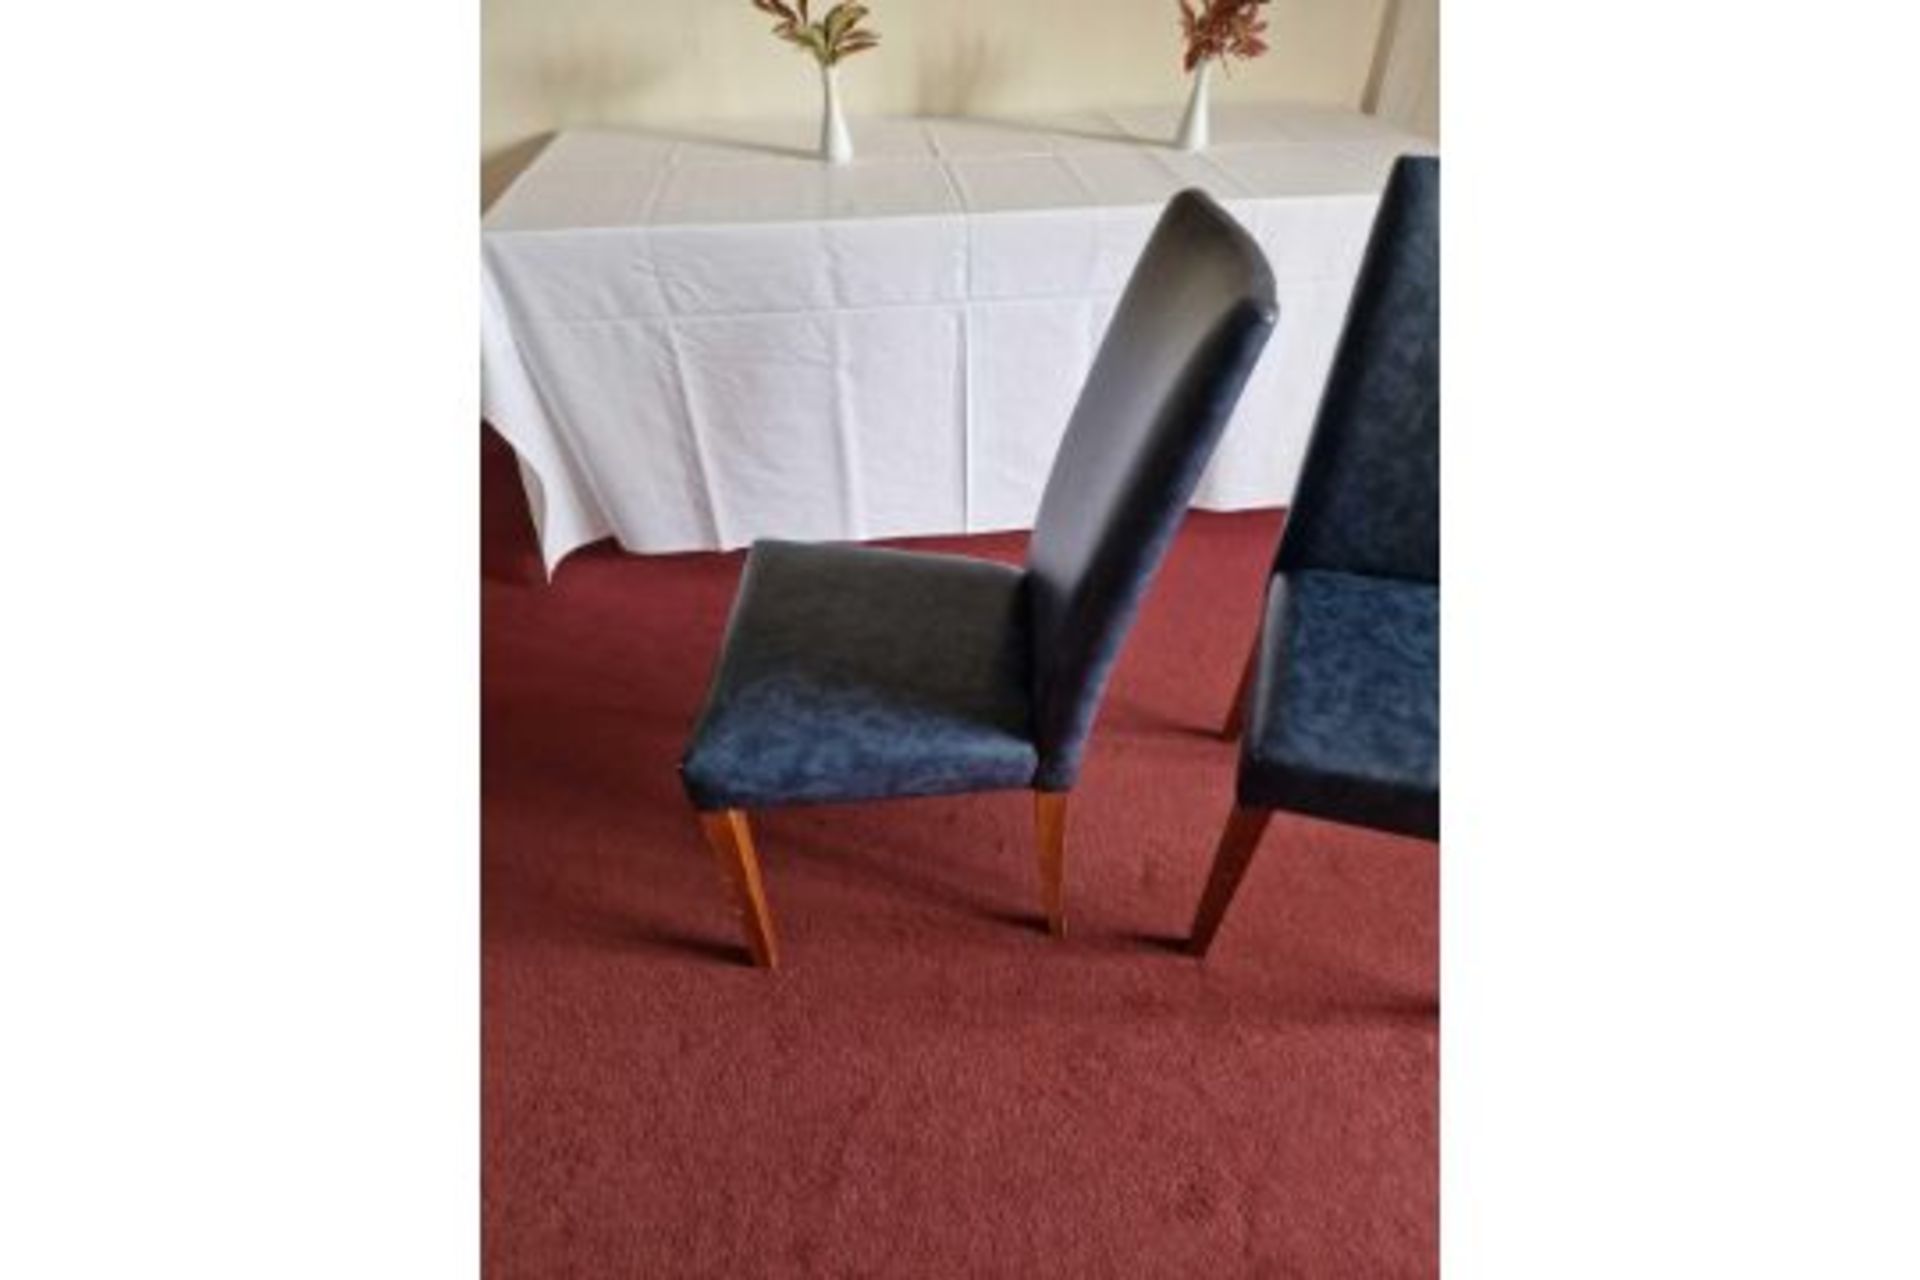 A Set Of 4 x Henshaw Blue Dining Chairs Smart And Stylish Chair Crafted From Solid Wood With - Image 4 of 4